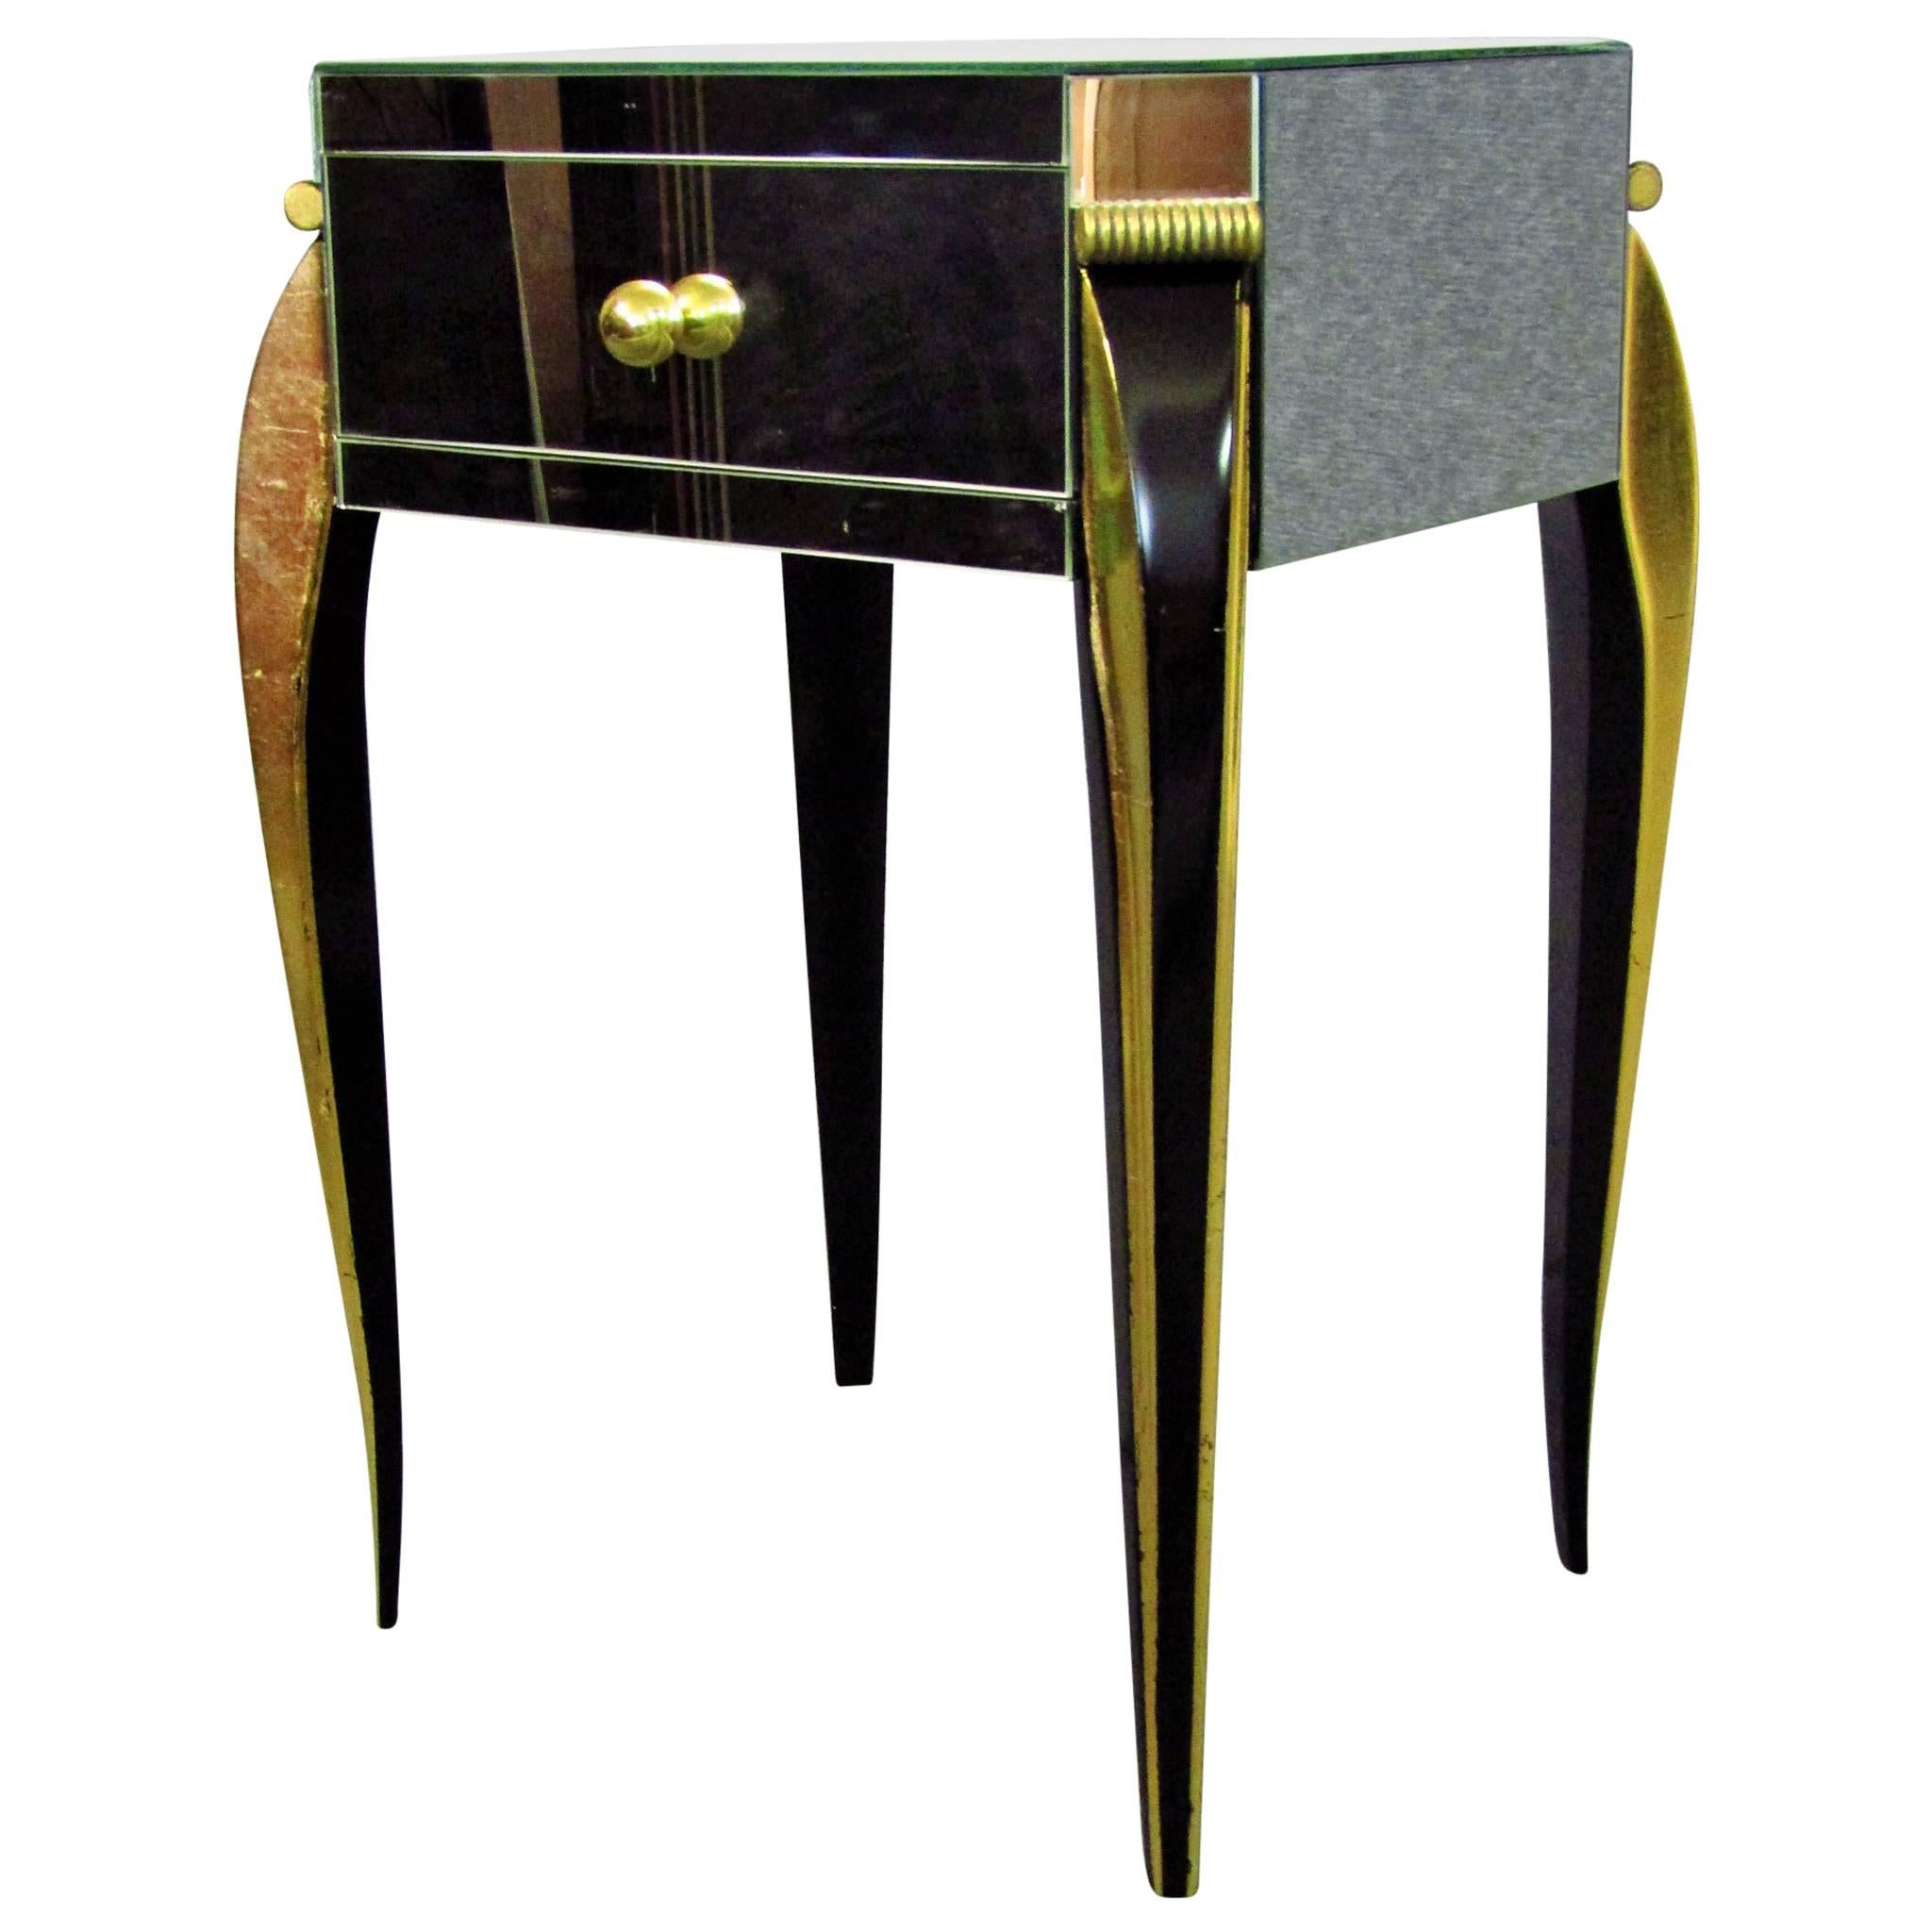 Mirrored Art Deco Side Table in the Style of Arbus, France, 1930